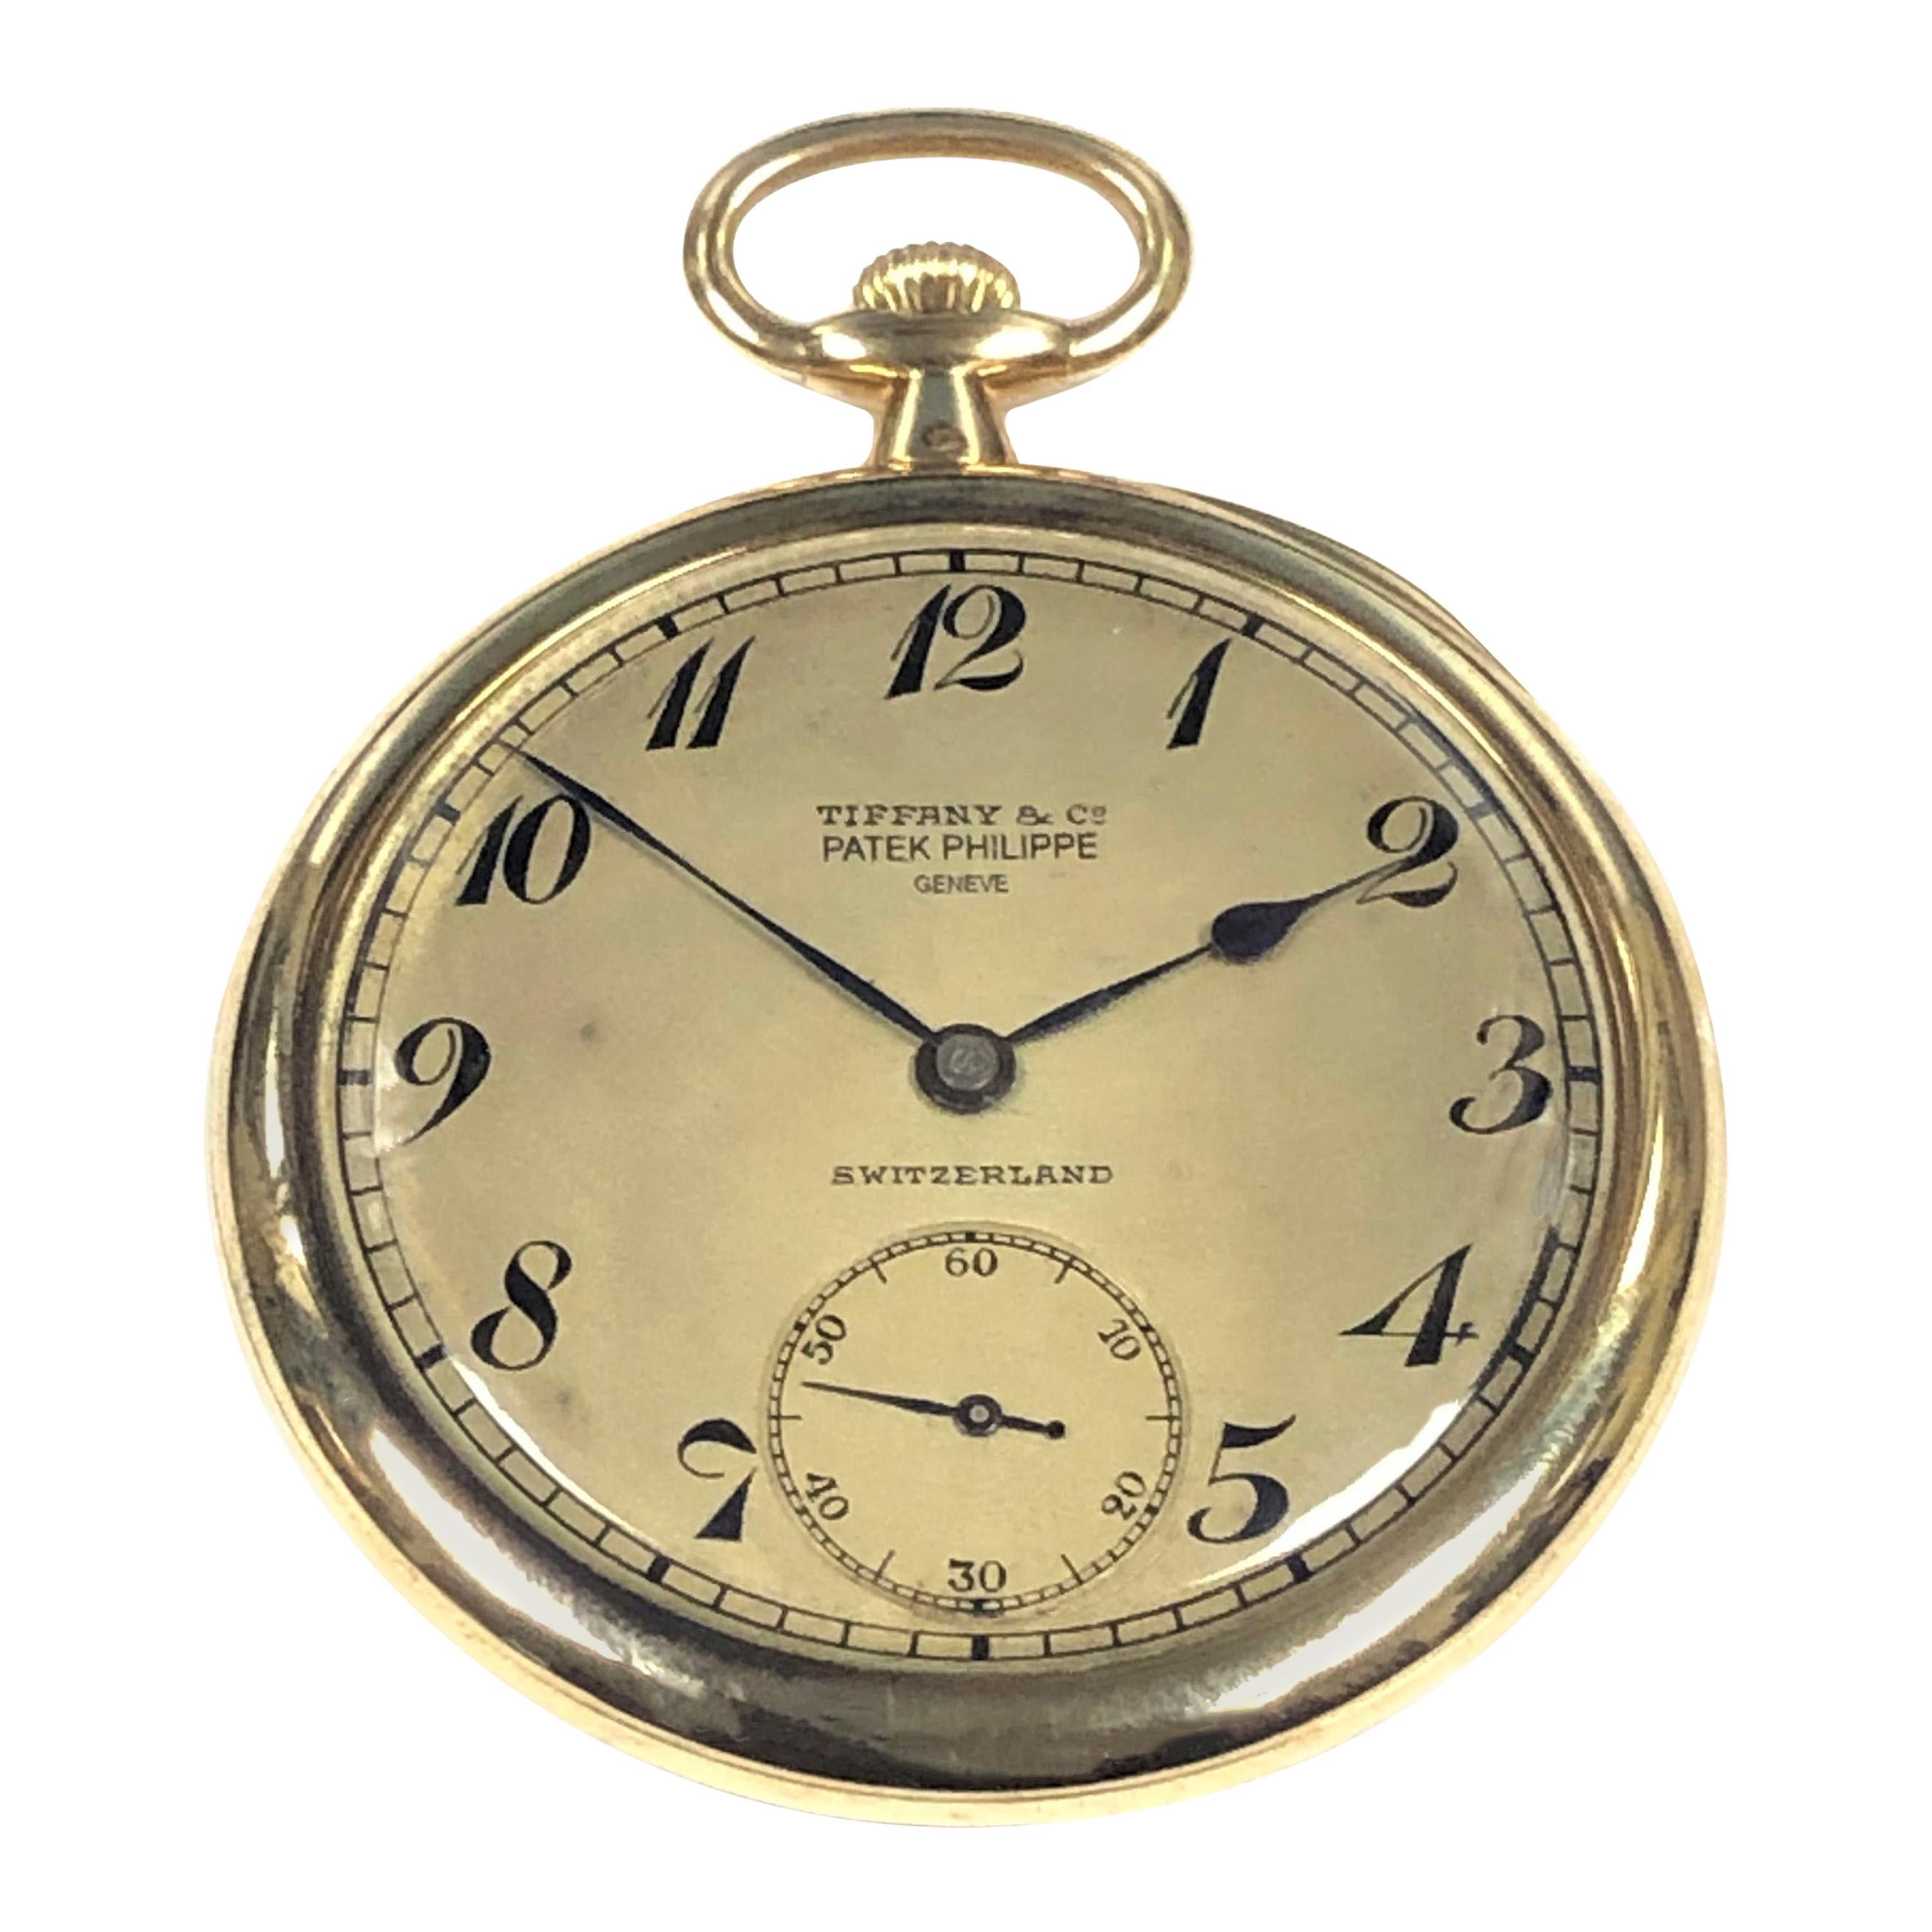 Patek Philippe for Tiffany & Co. 1920s Yellow Gold Pocket Watch